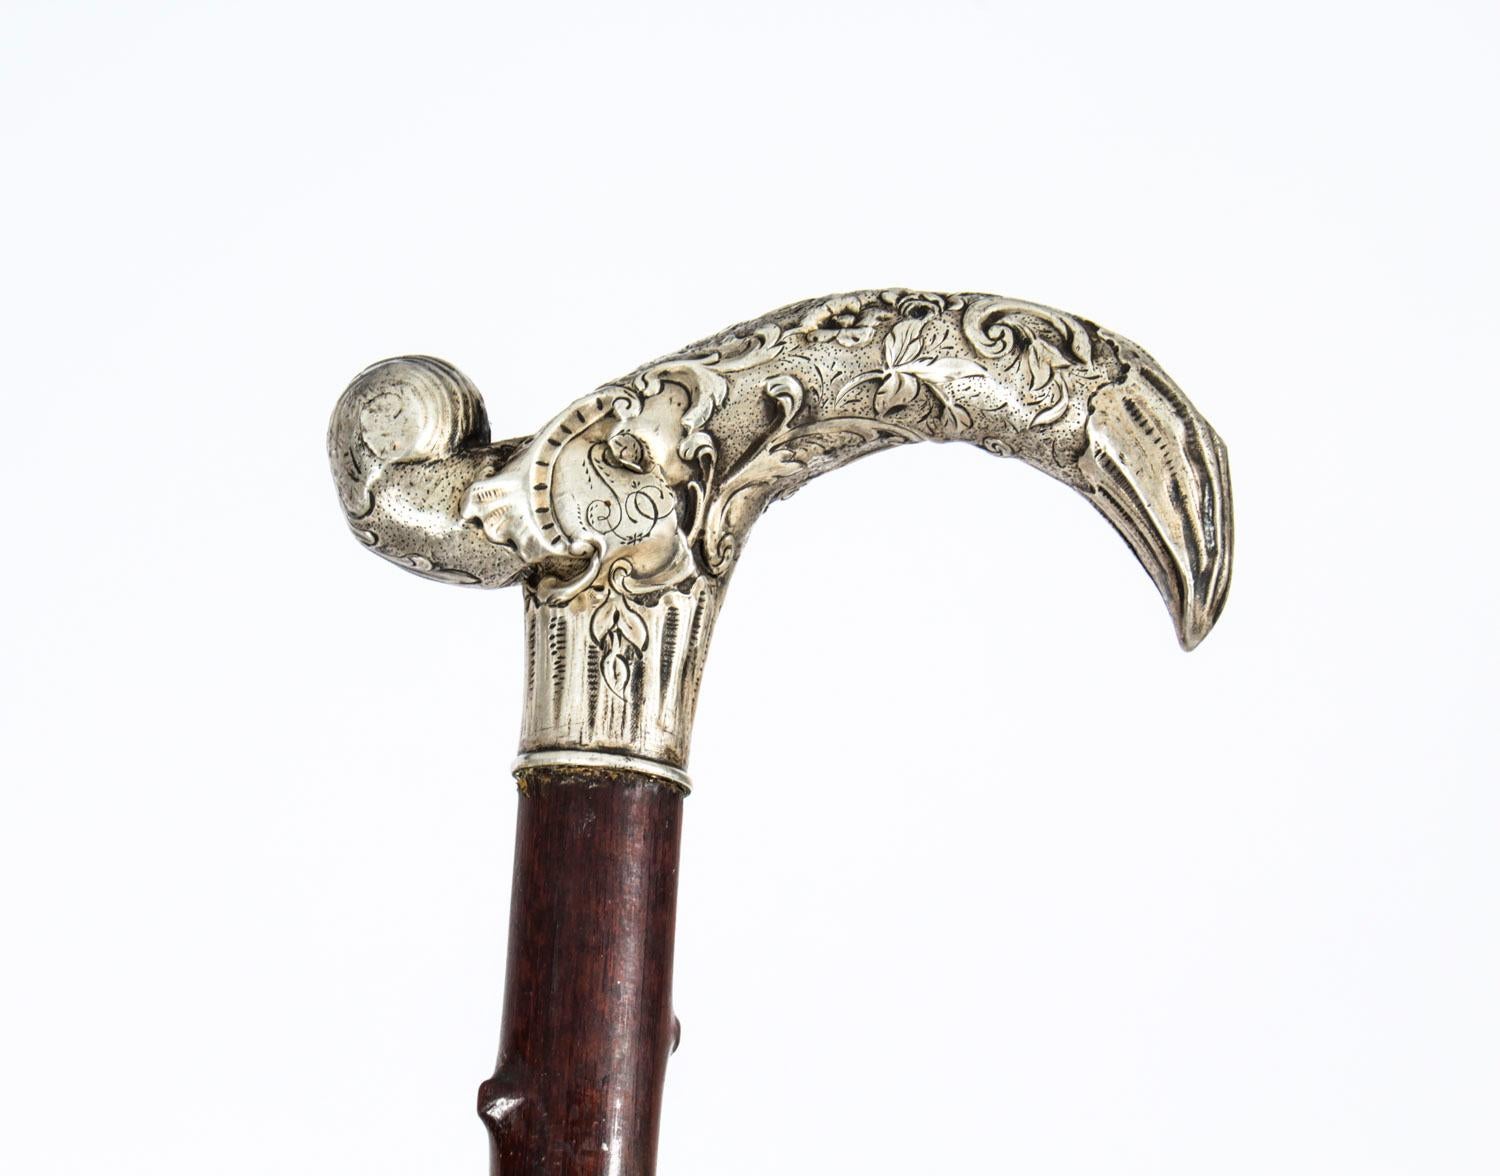 Antique Silver Plated Walking Cane Stick, 19th Century 4